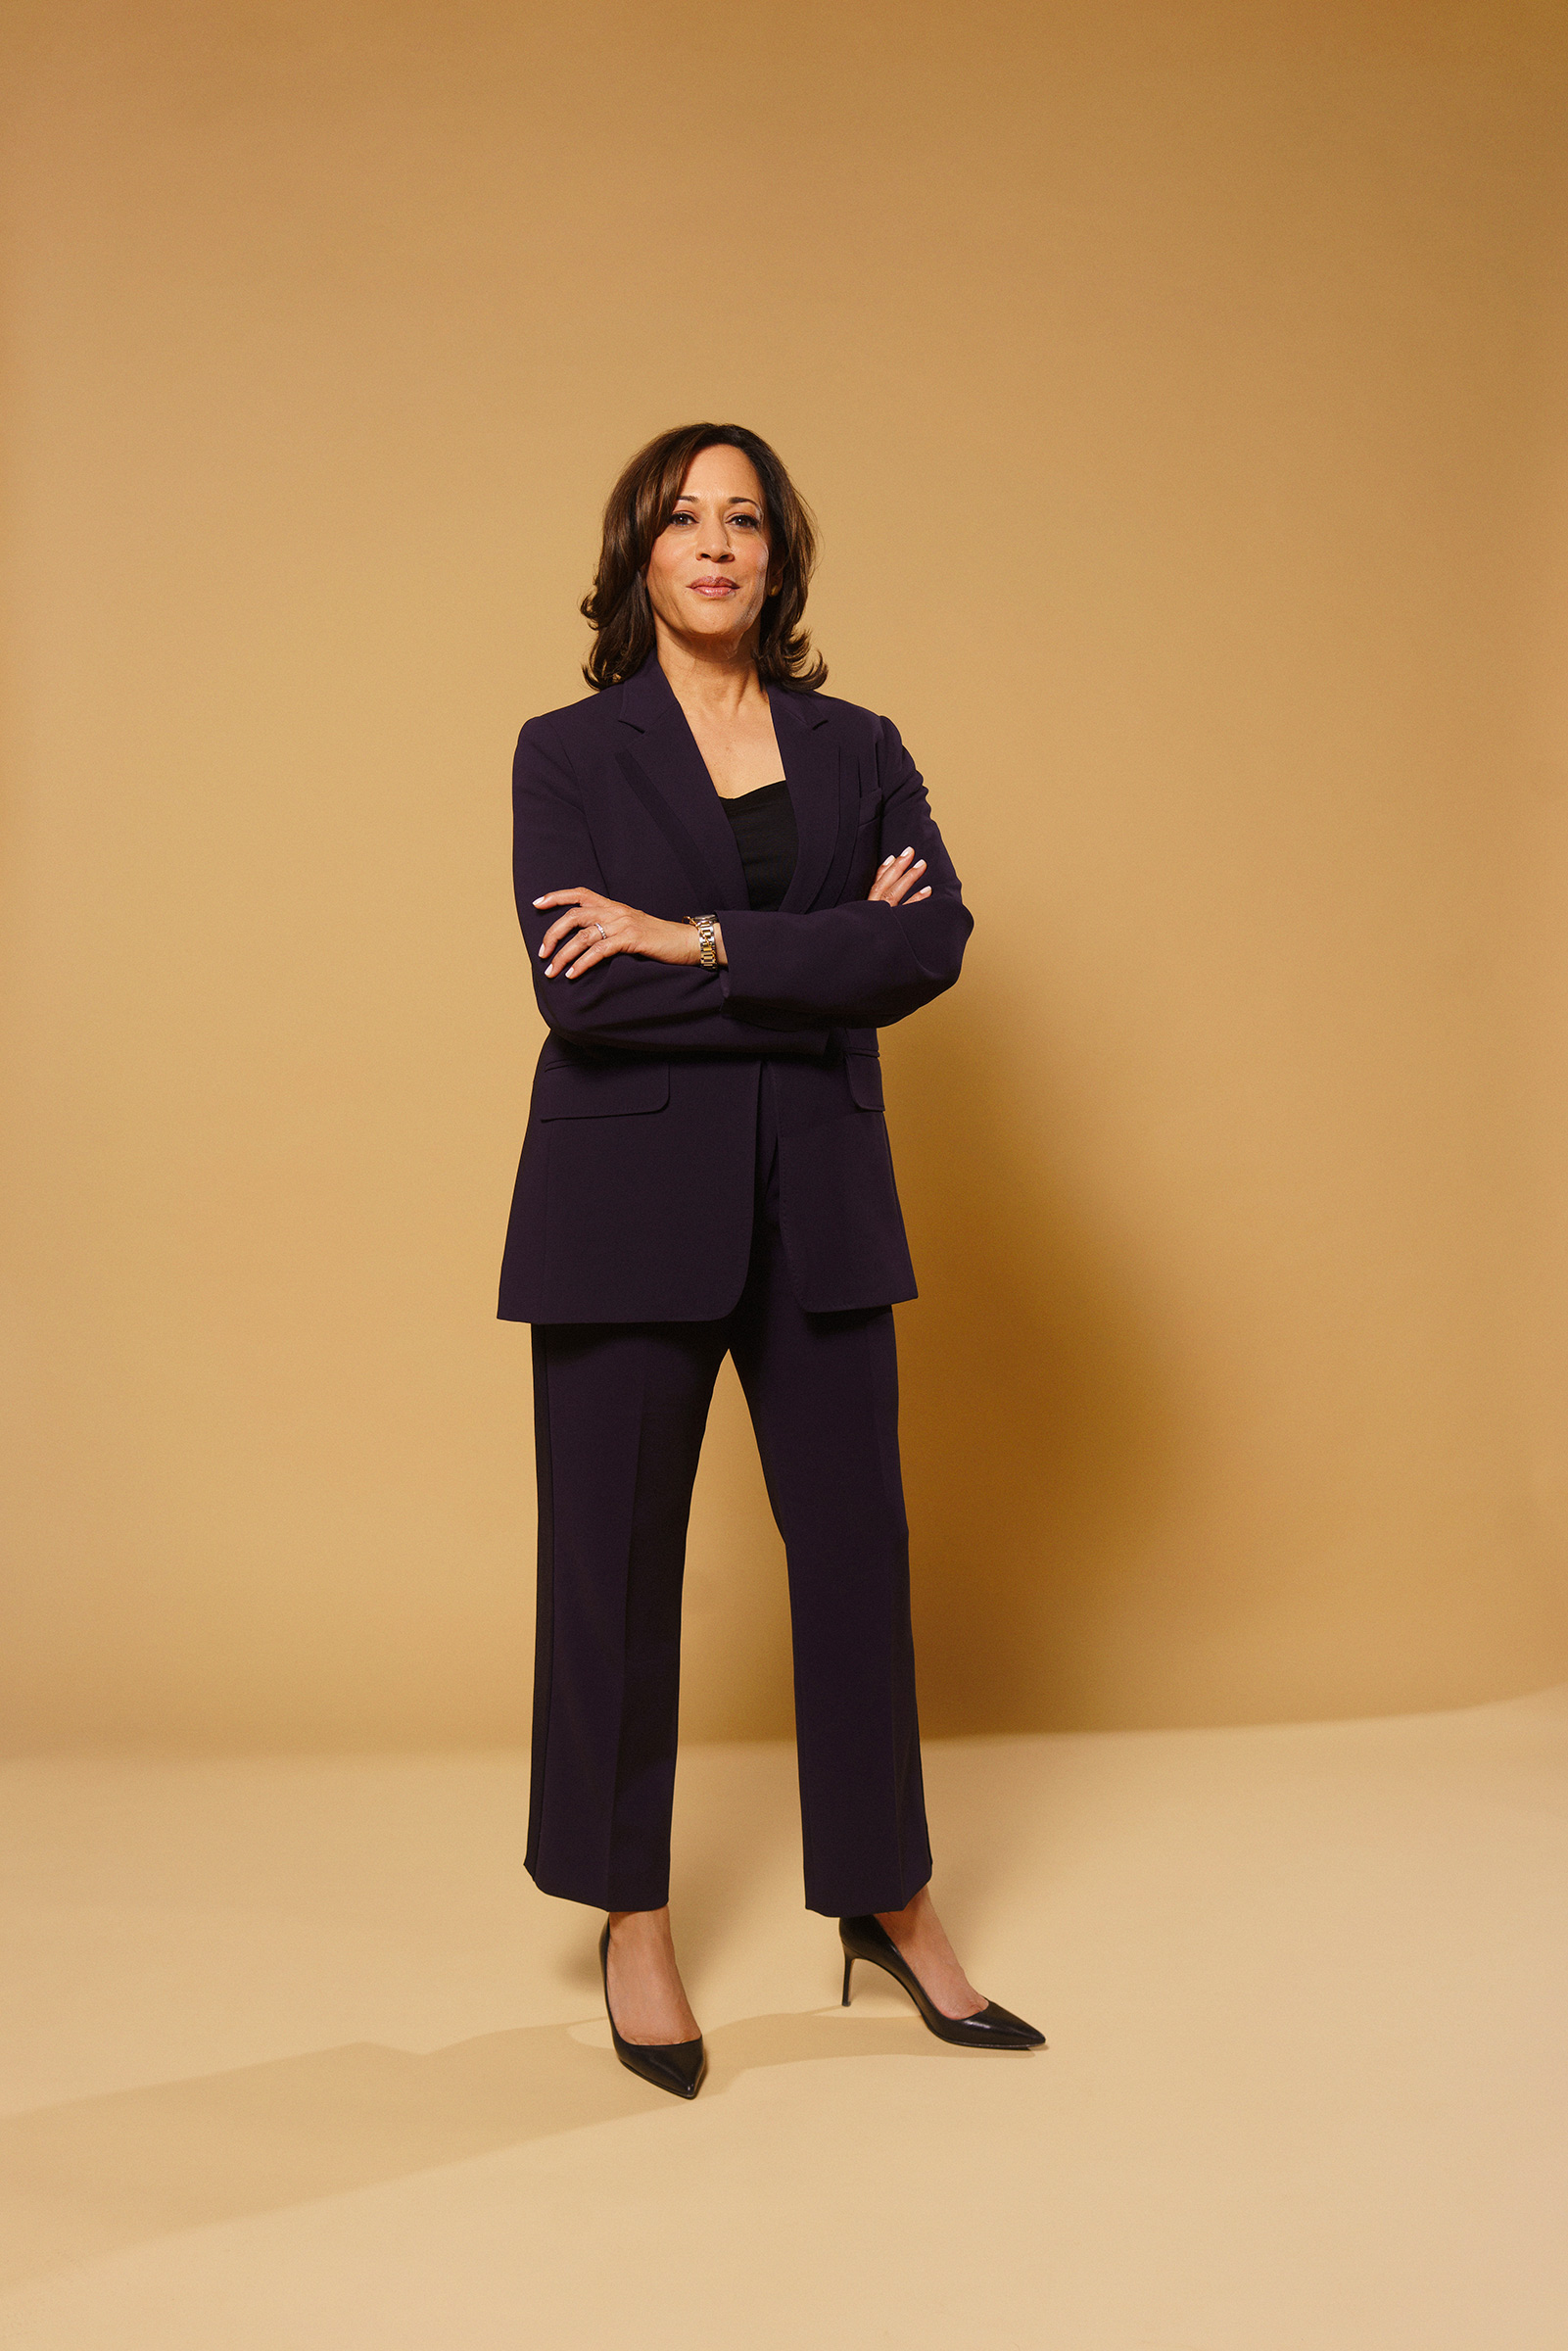 Kamala Harris, photographed in Los Angeles, October 2019Nolwen Cifuentes for TIME